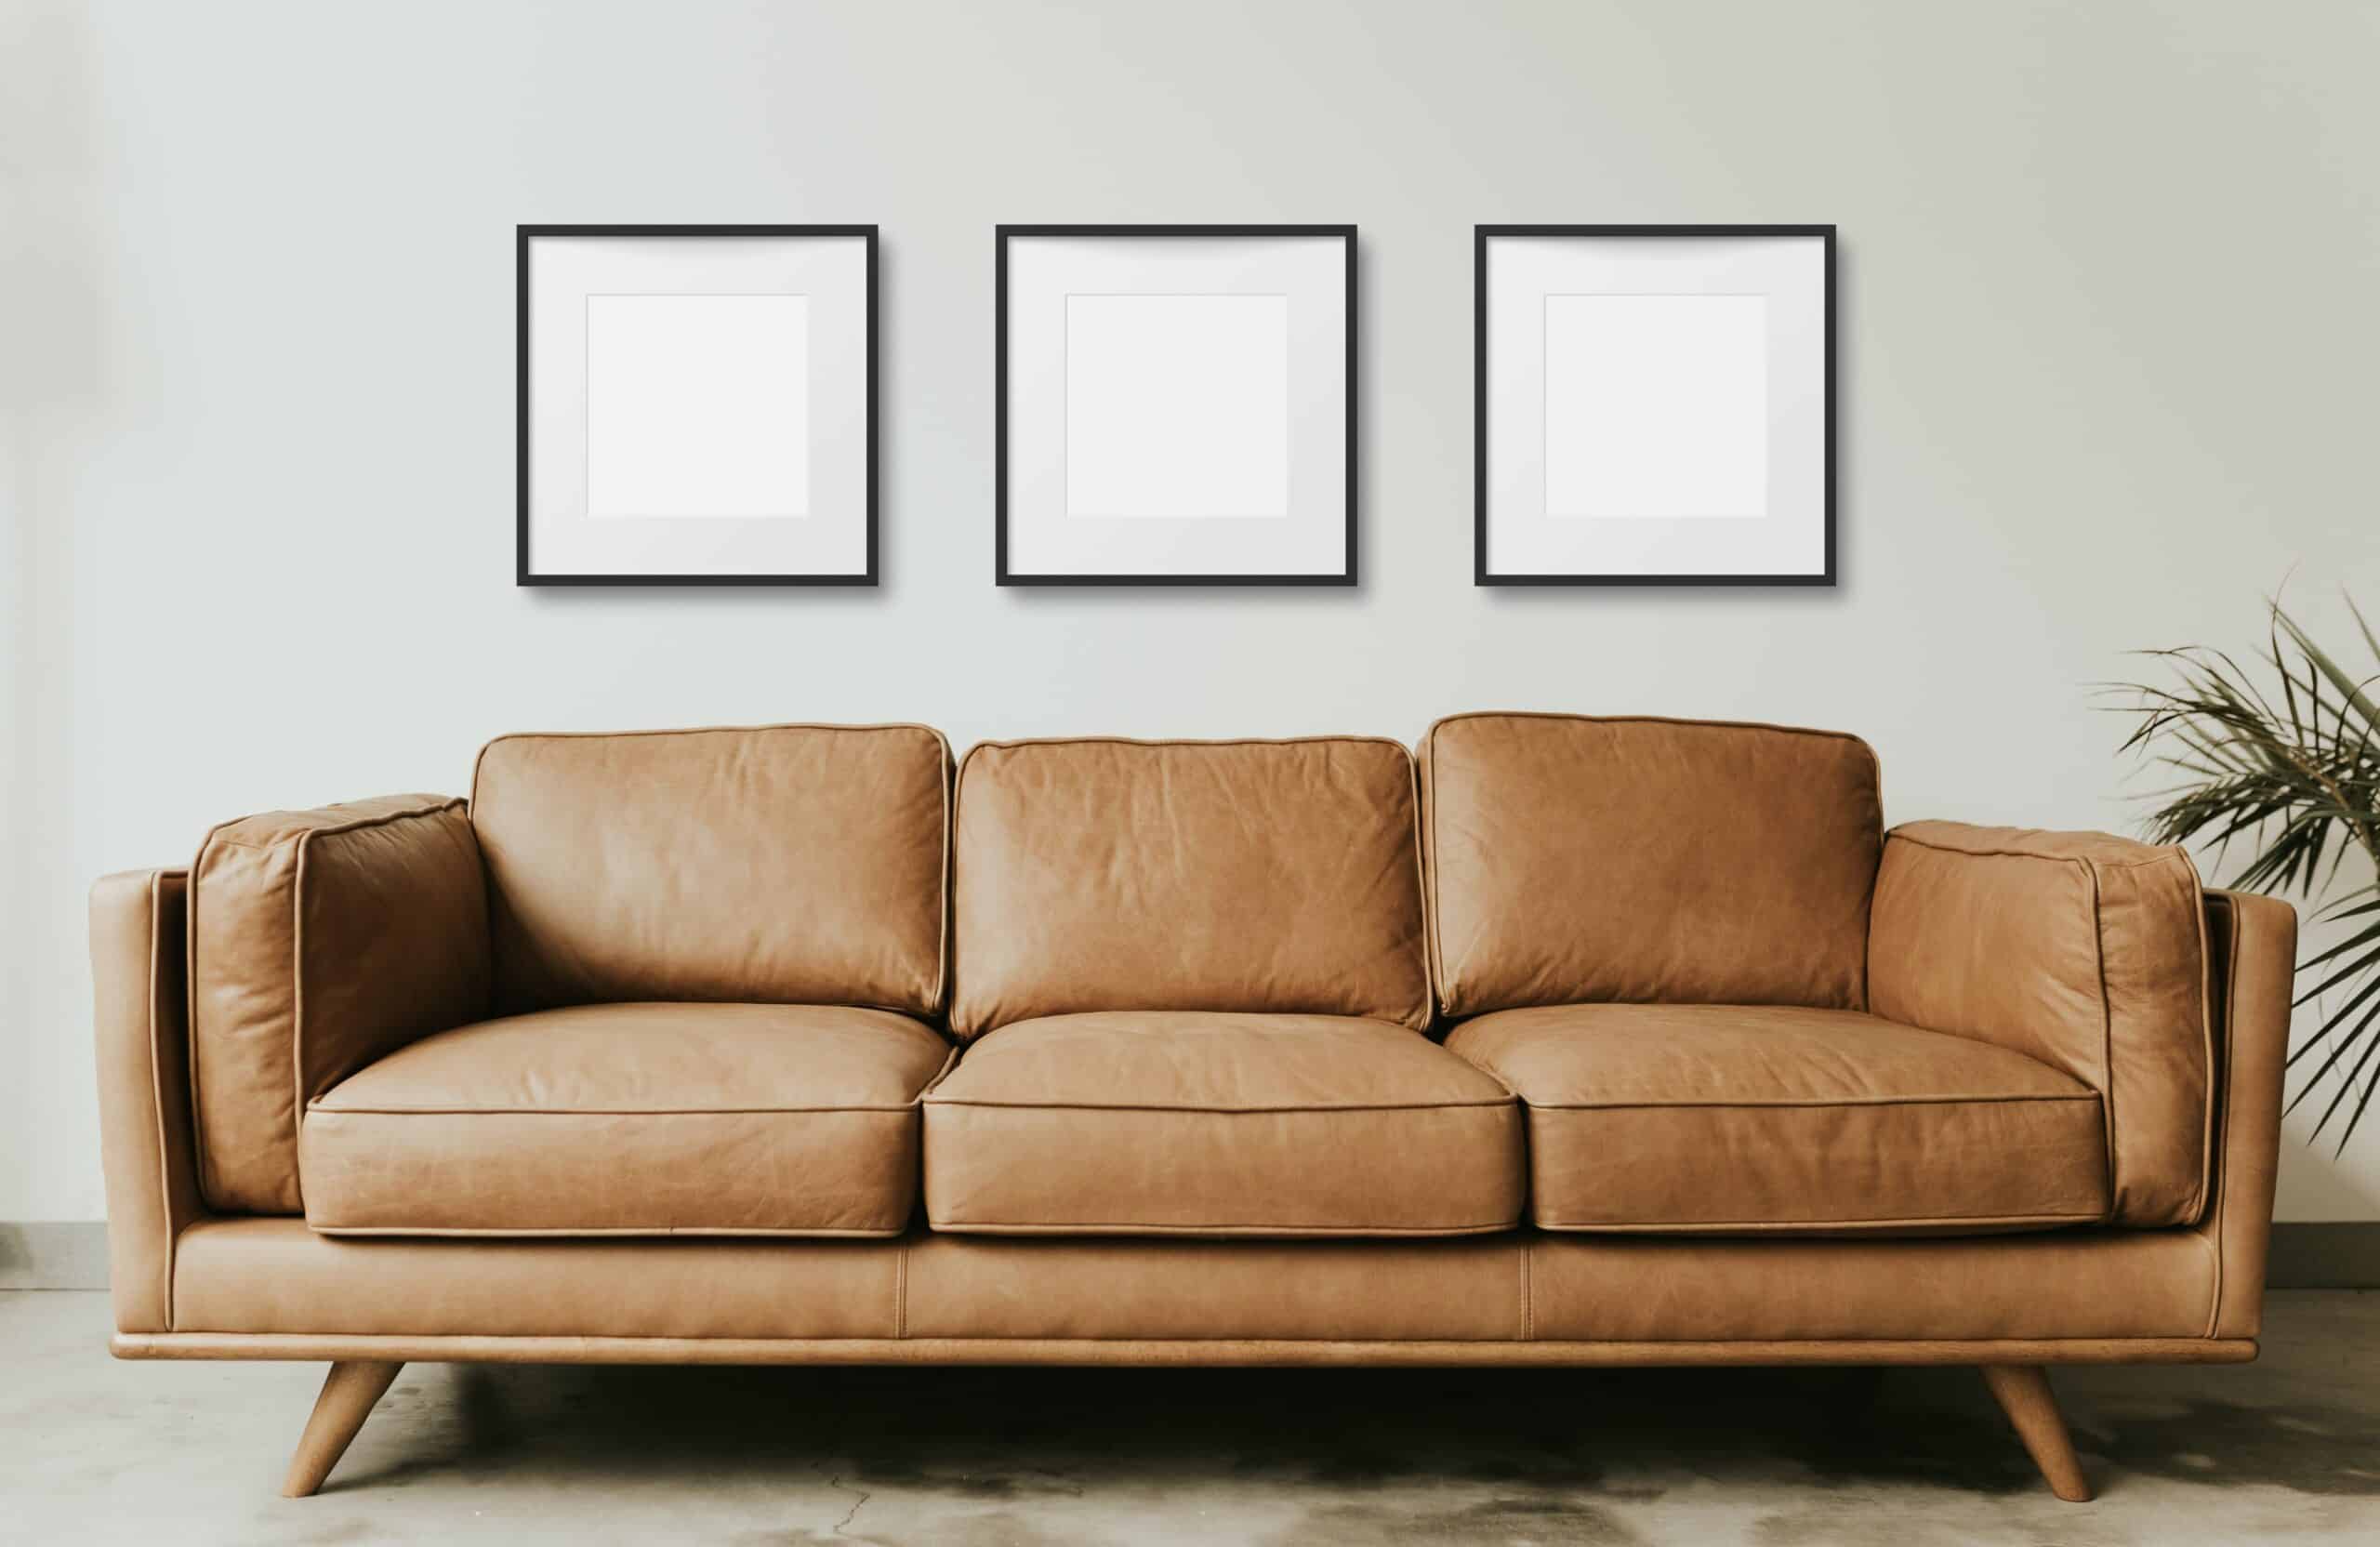 Black Frame Art Mockup Gallery Wall over a Tan Leather Mid- Century Modern Sofa in a room with light grey walls and concrete floors and a house plant, set of 3 matching hanging frames